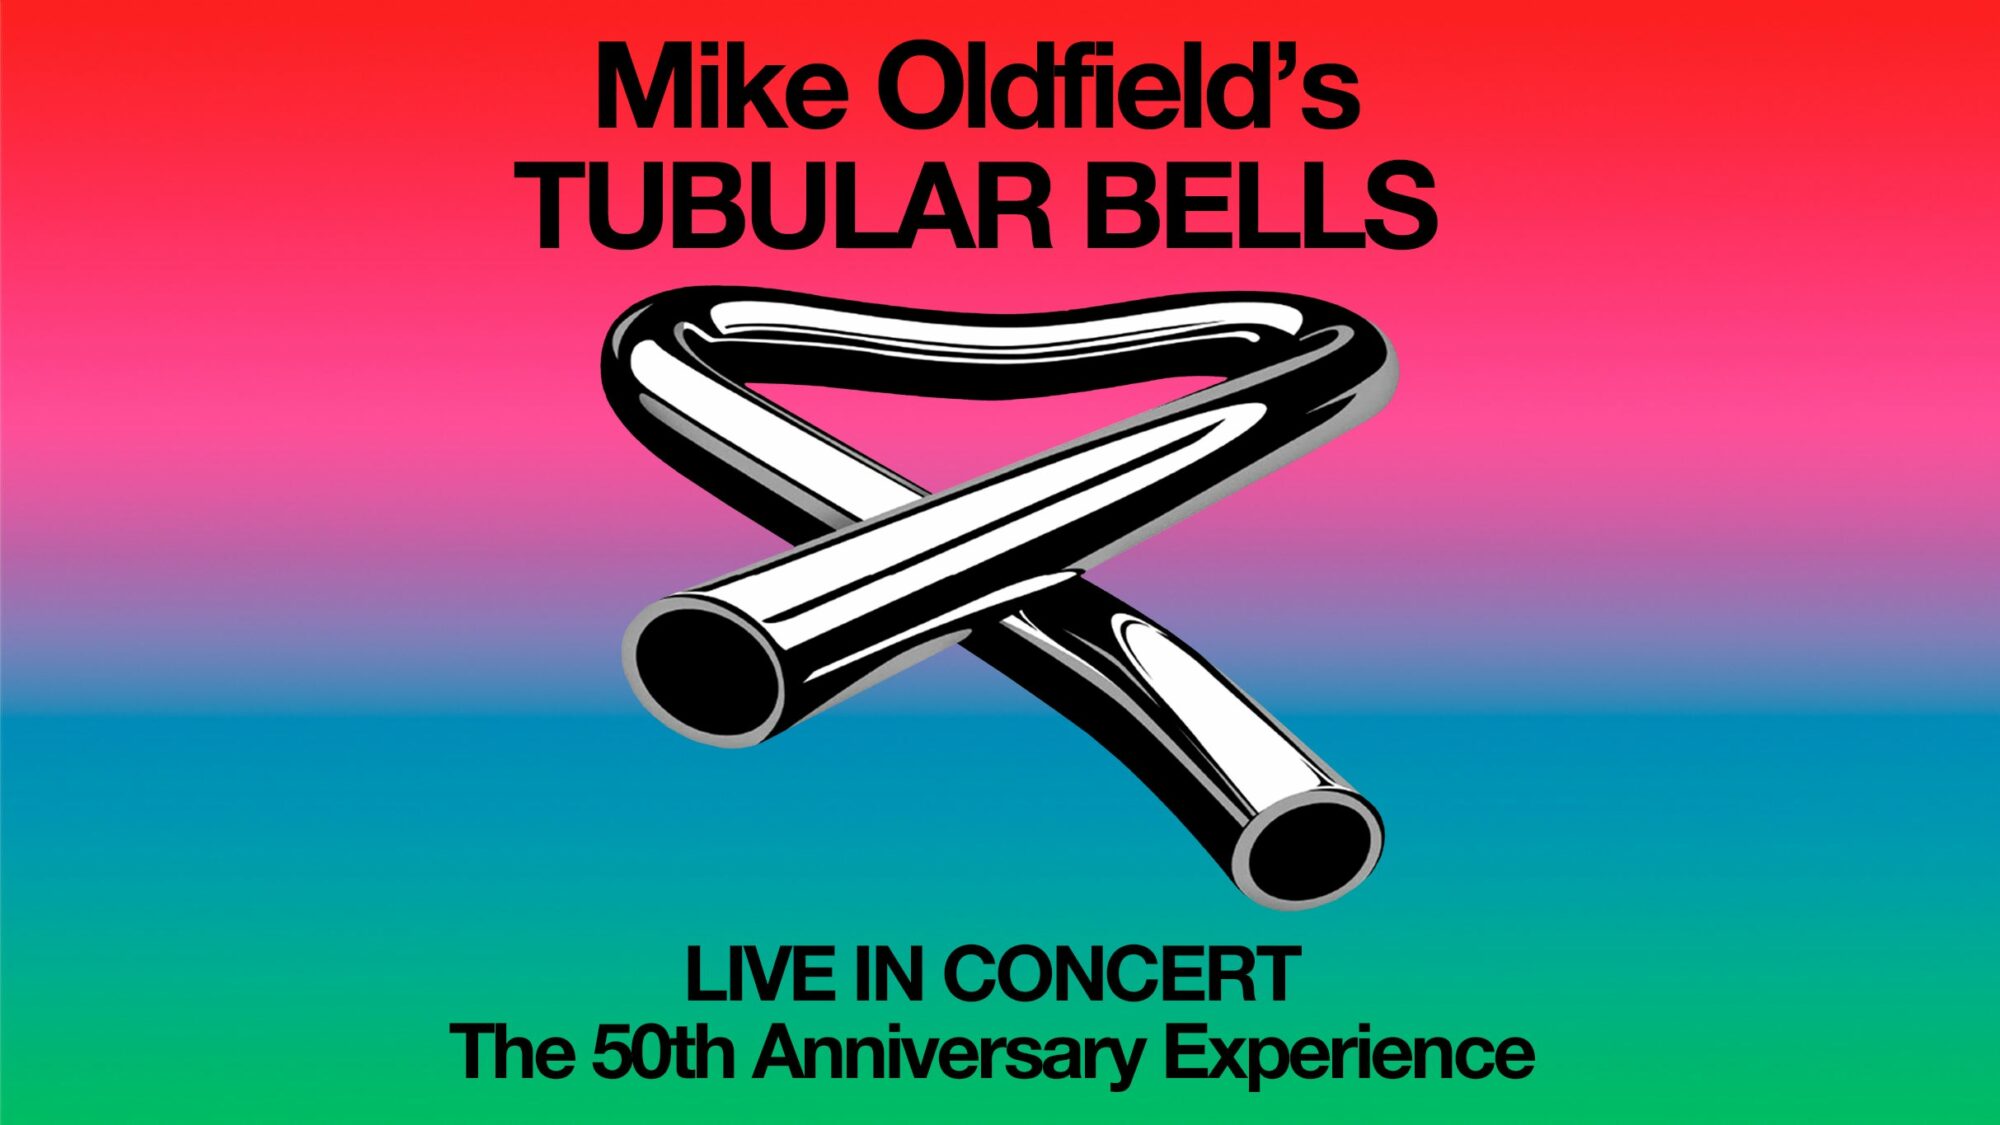 Image name Mike Oldfields Tubular Bells 50th Anniversary Tour at Sheffield City Hall Oval Hall Sheffield the 30 image from the post Mike Oldfield's Tubular Bells: 50th Anniversary Tour at Sheffield City Hall Oval Hall, Sheffield in Yorkshire.com.